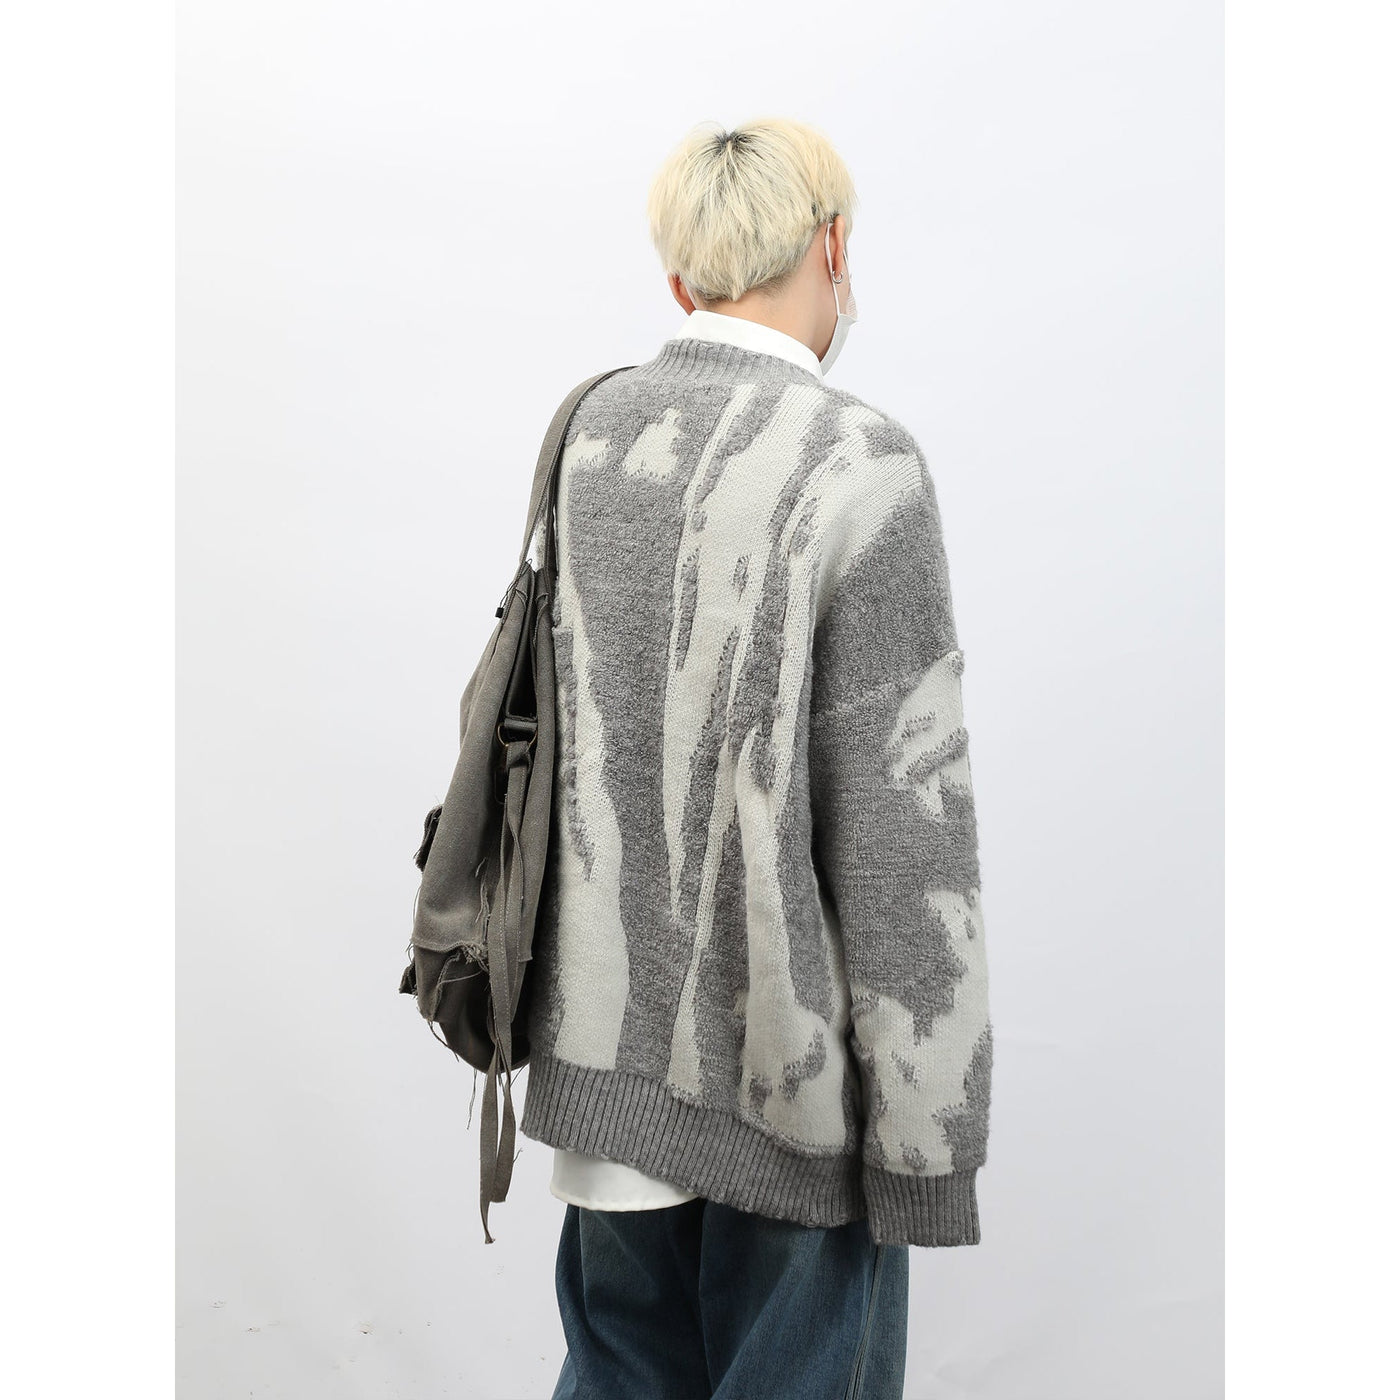 Two Tone Knit Cardigan Korean Street Fashion Cardigan By MaxDstr Shop Online at OH Vault